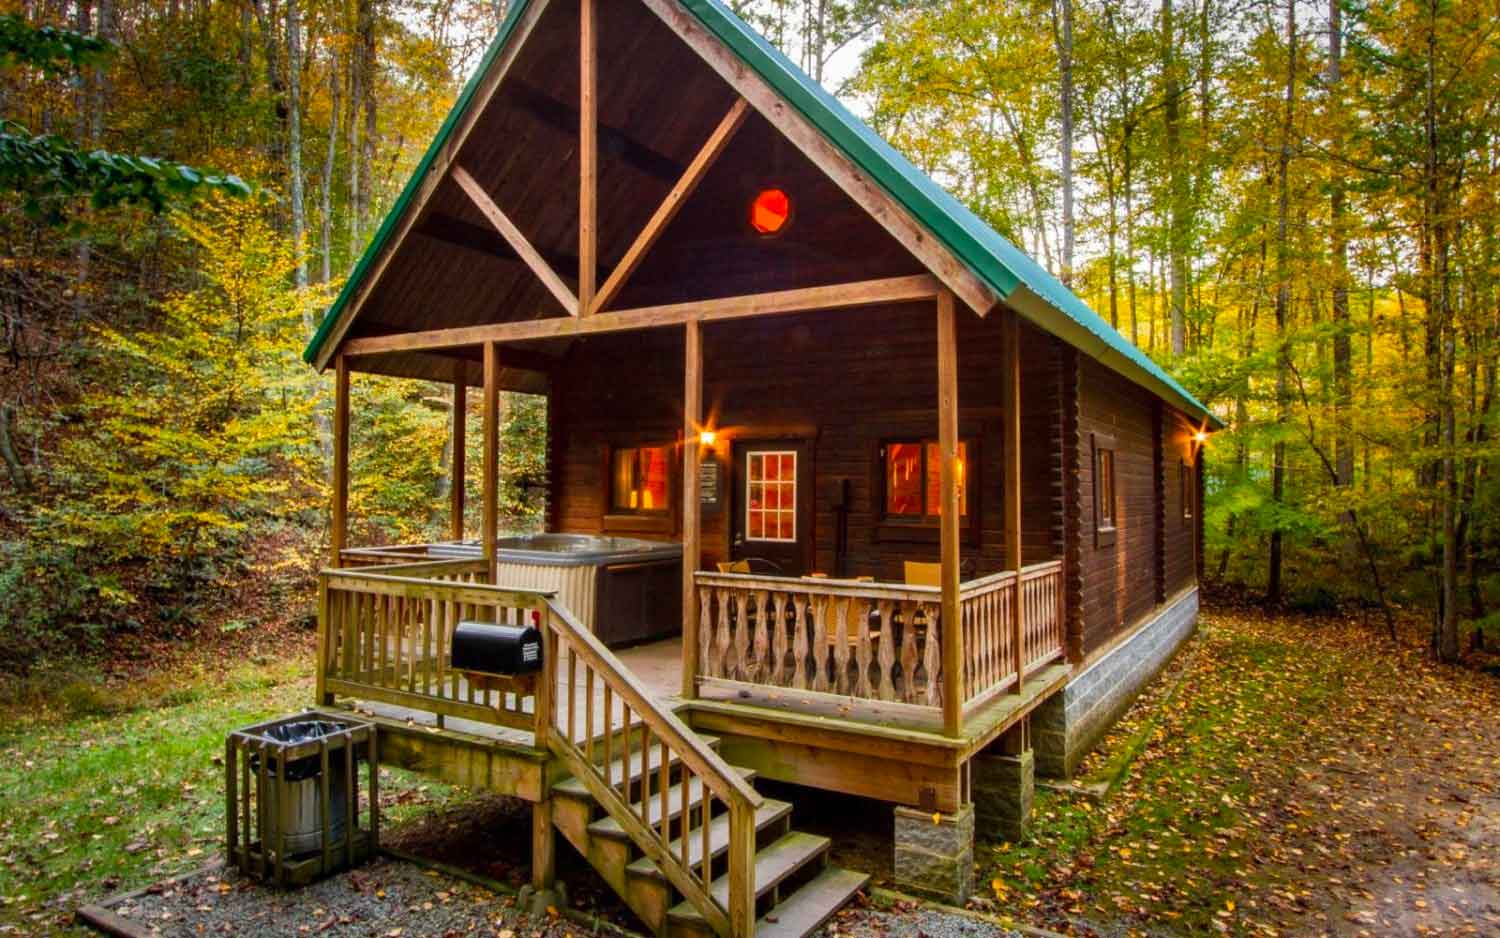 An exterior shot of the Aspen one of our guests favorite ACE Adventure Resort New River Gorge, West Virginia cabin rentals.